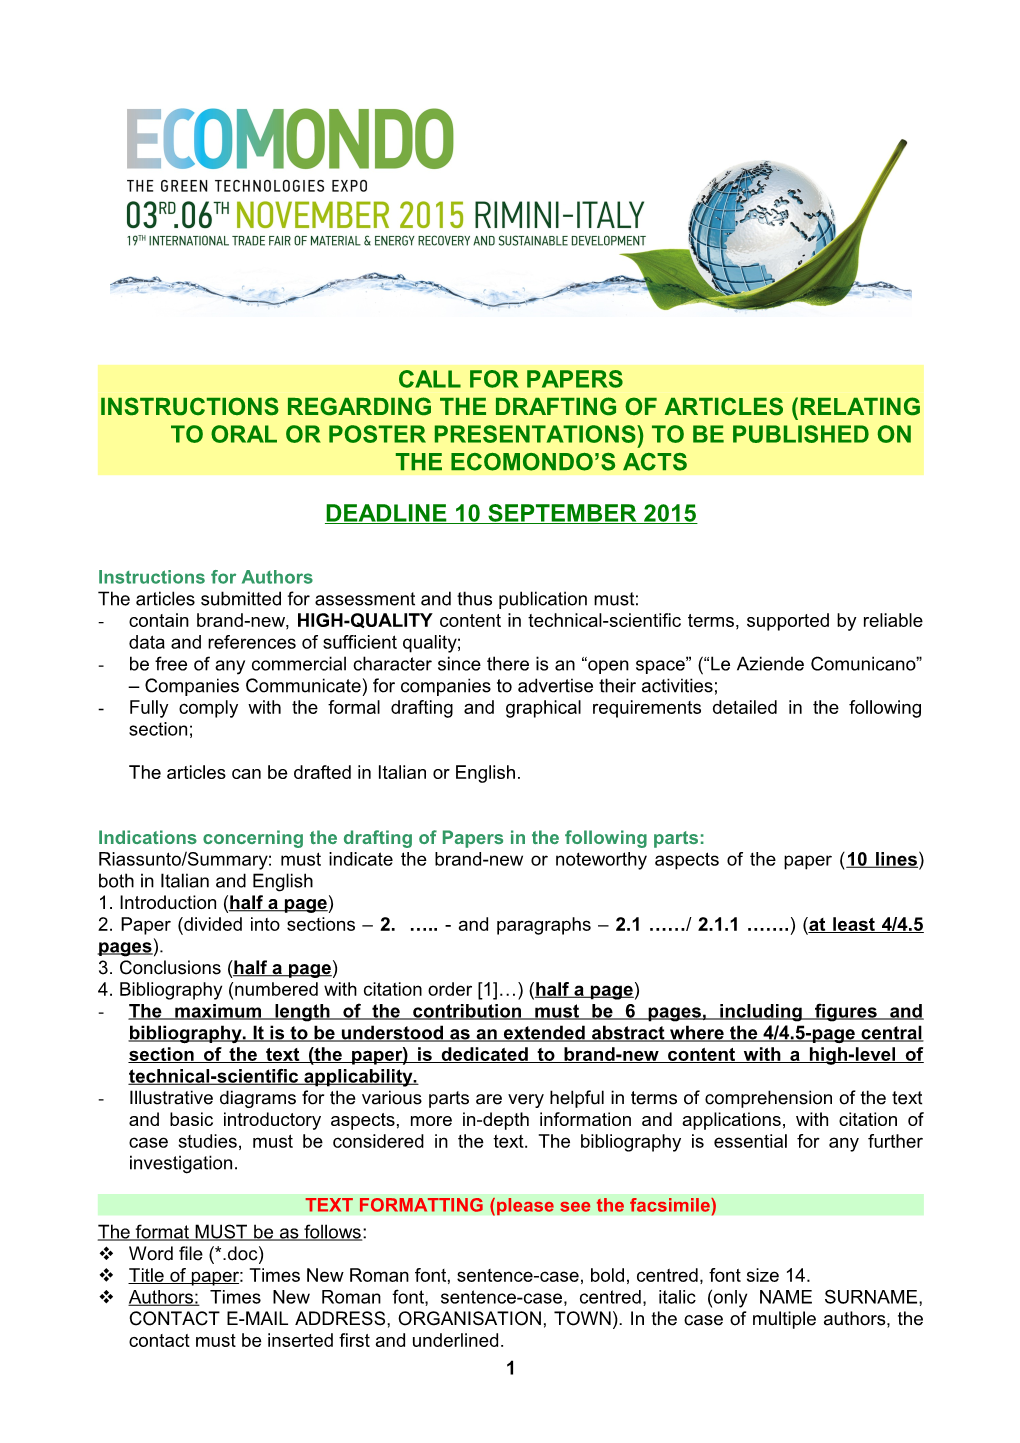 Call for Papers s21